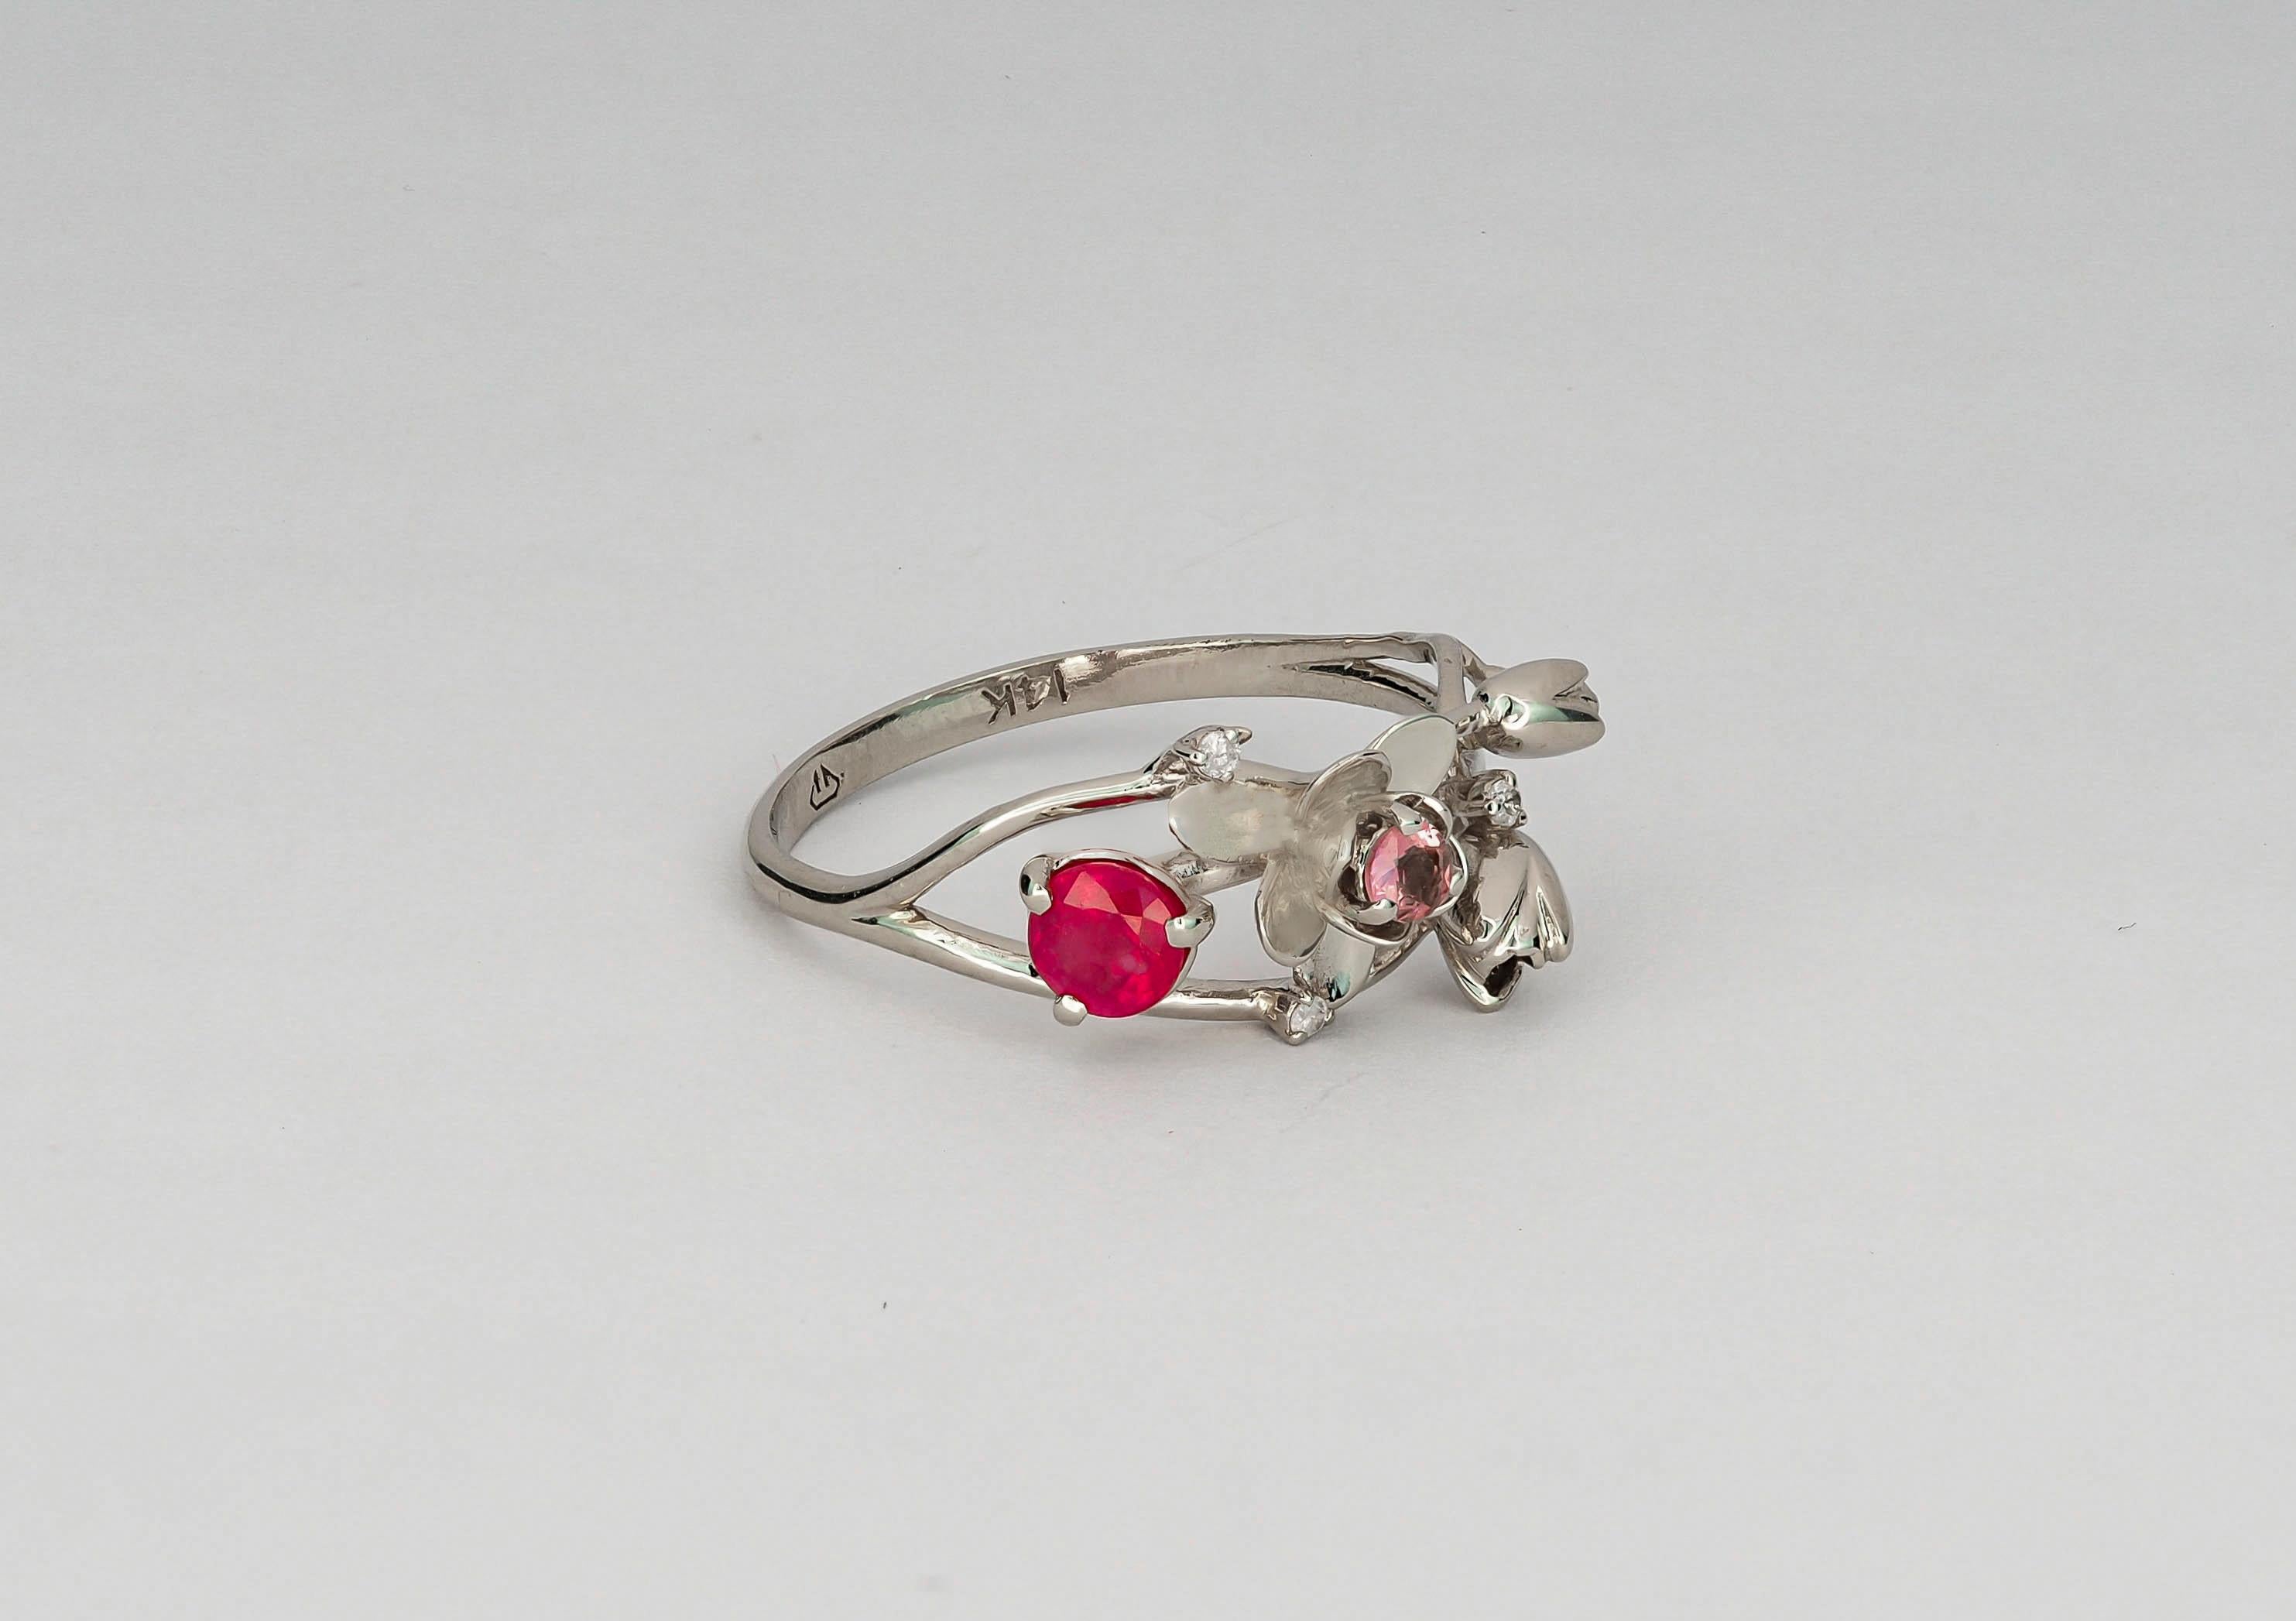 Modern 14 Karat White Gold Ring with Ruby, Sapphire and Diamonds. Orchid Gold Ring